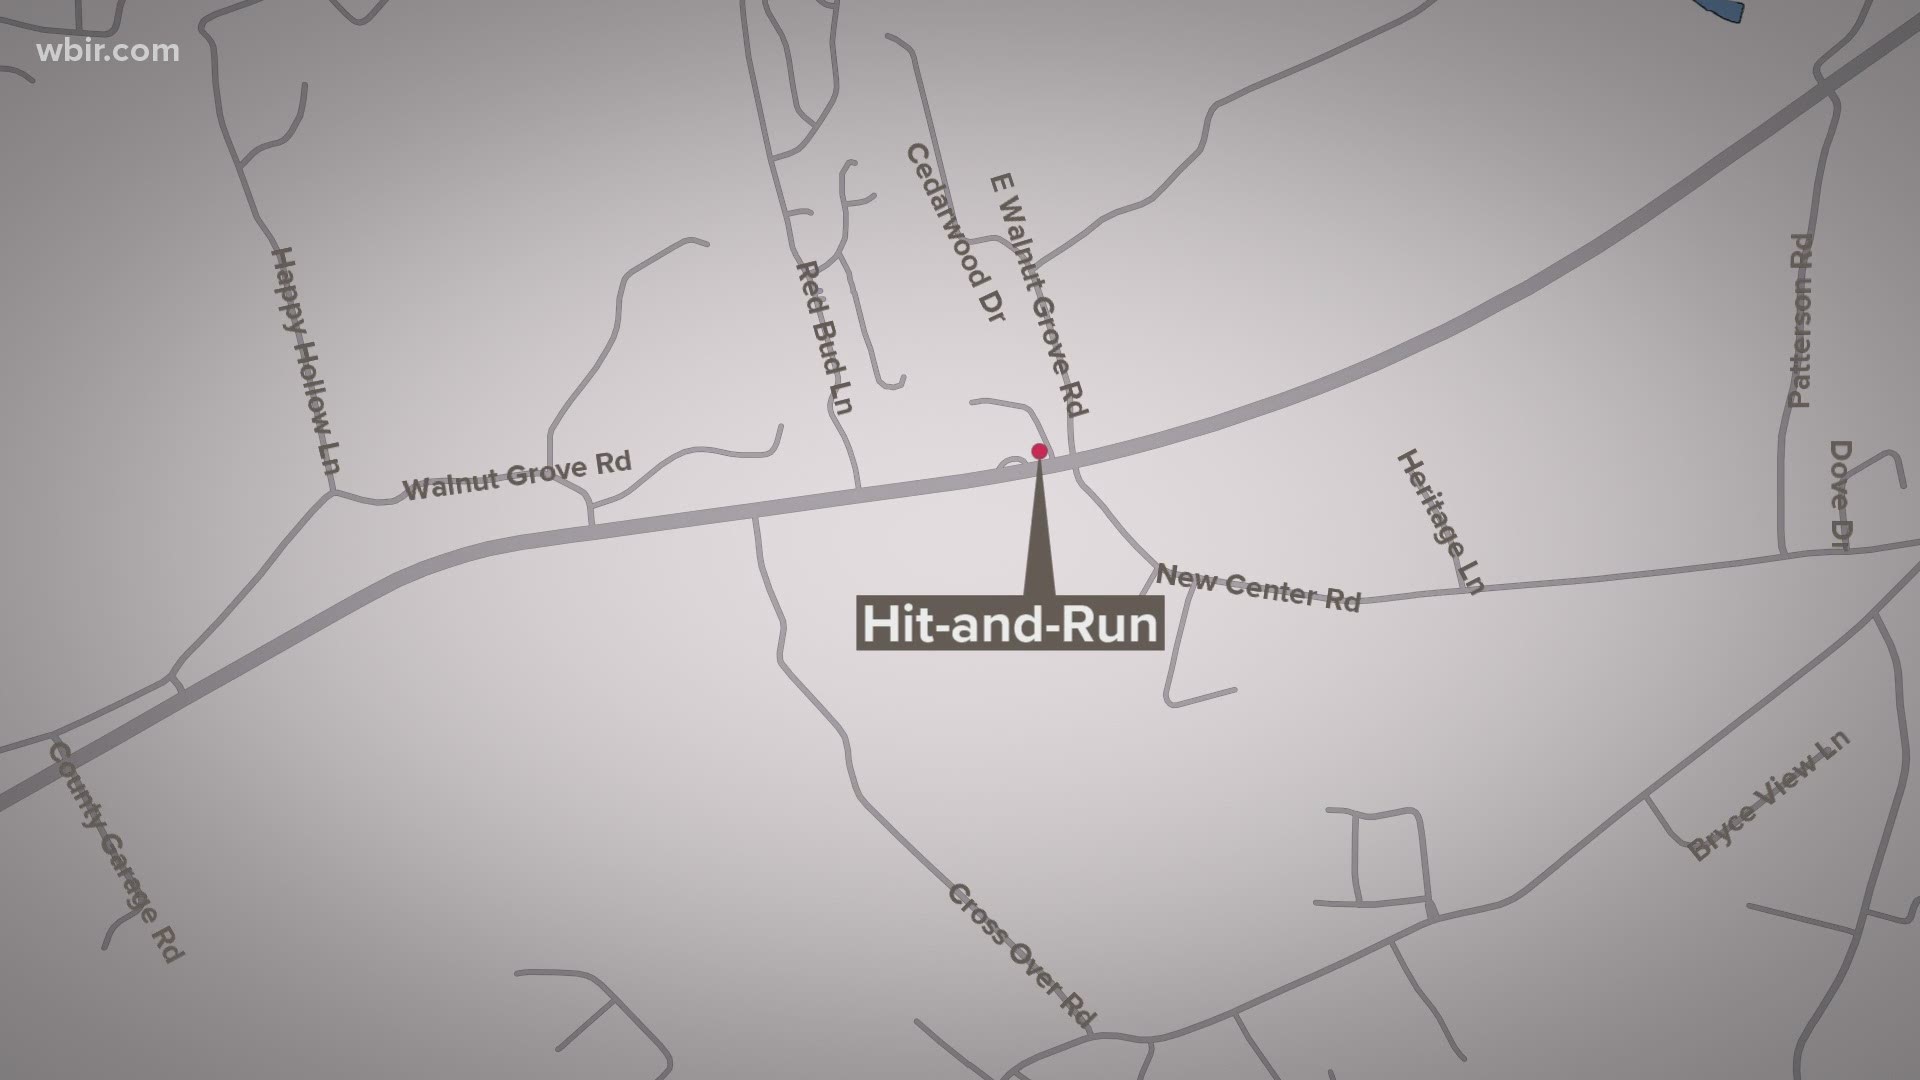 THP is now asking for information in a deadly hit and run in Sevier County.